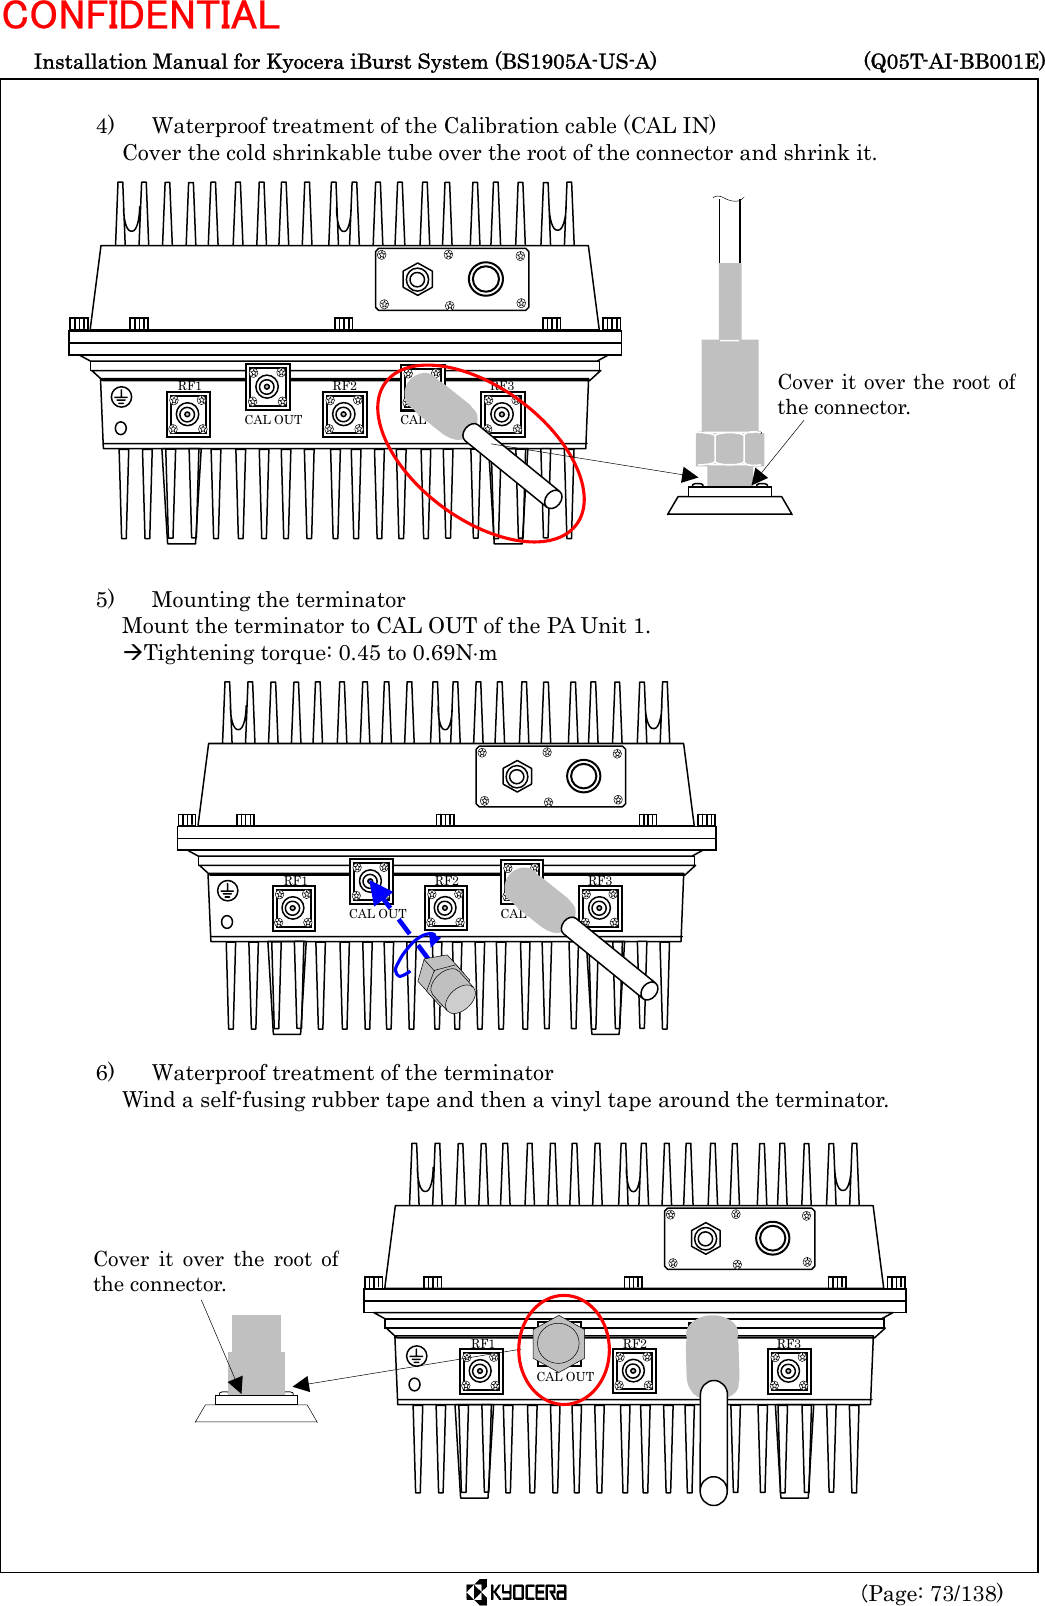  Installation Manual for Kyocera iBurst System (BS1905A-US-A)     (Q05T-AI-BB001E) (Page: 73/138) CONFIDENTIAL  4)    Waterproof treatment of the Calibration cable (CAL IN) Cover the cold shrinkable tube over the root of the connector and shrink it.                 5)    Mounting the terminator Mount the terminator to CAL OUT of the PA Unit 1. ÆTightening torque: 0.45 to 0.69N⋅m                6)    Waterproof treatment of the terminator Wind a self-fusing rubber tape and then a vinyl tape around the terminator.                 RF3 RF2 RF1 CAL OUT  CAL IN Cover it over the root ofthe connector.   RF3 RF2 RF1 CAL OUT  CAL IN Cover it over the root ofthe connector.   RF3 RF2 RF1 CAL OUT  CAL IN 